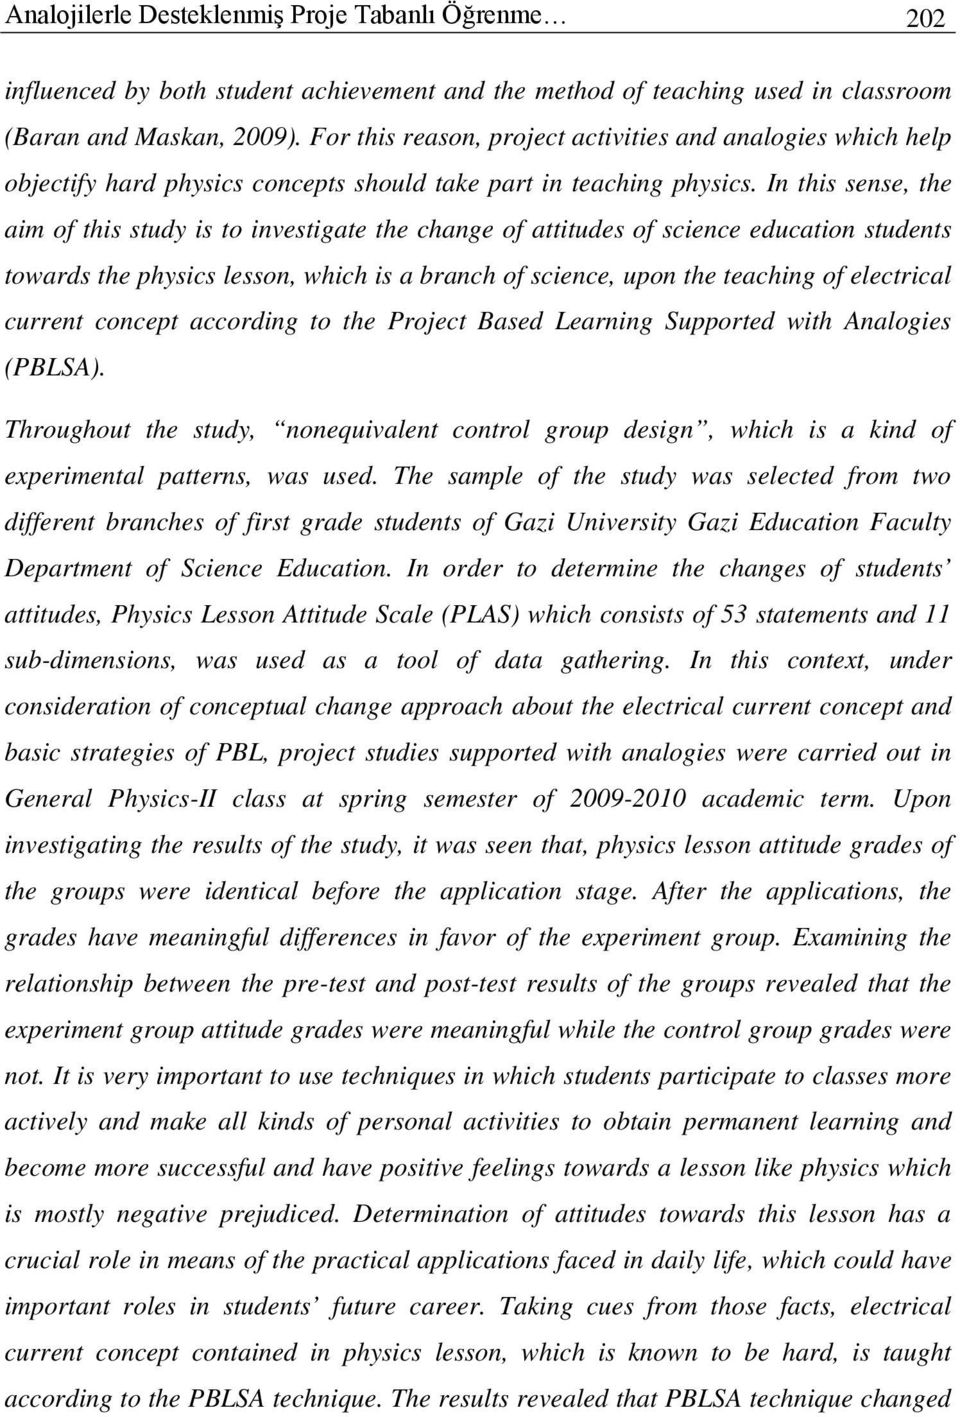 In this sense, the aim of this study is to investigate the change of attitudes of science education students towards the physics lesson, which is a branch of science, upon the teaching of electrical